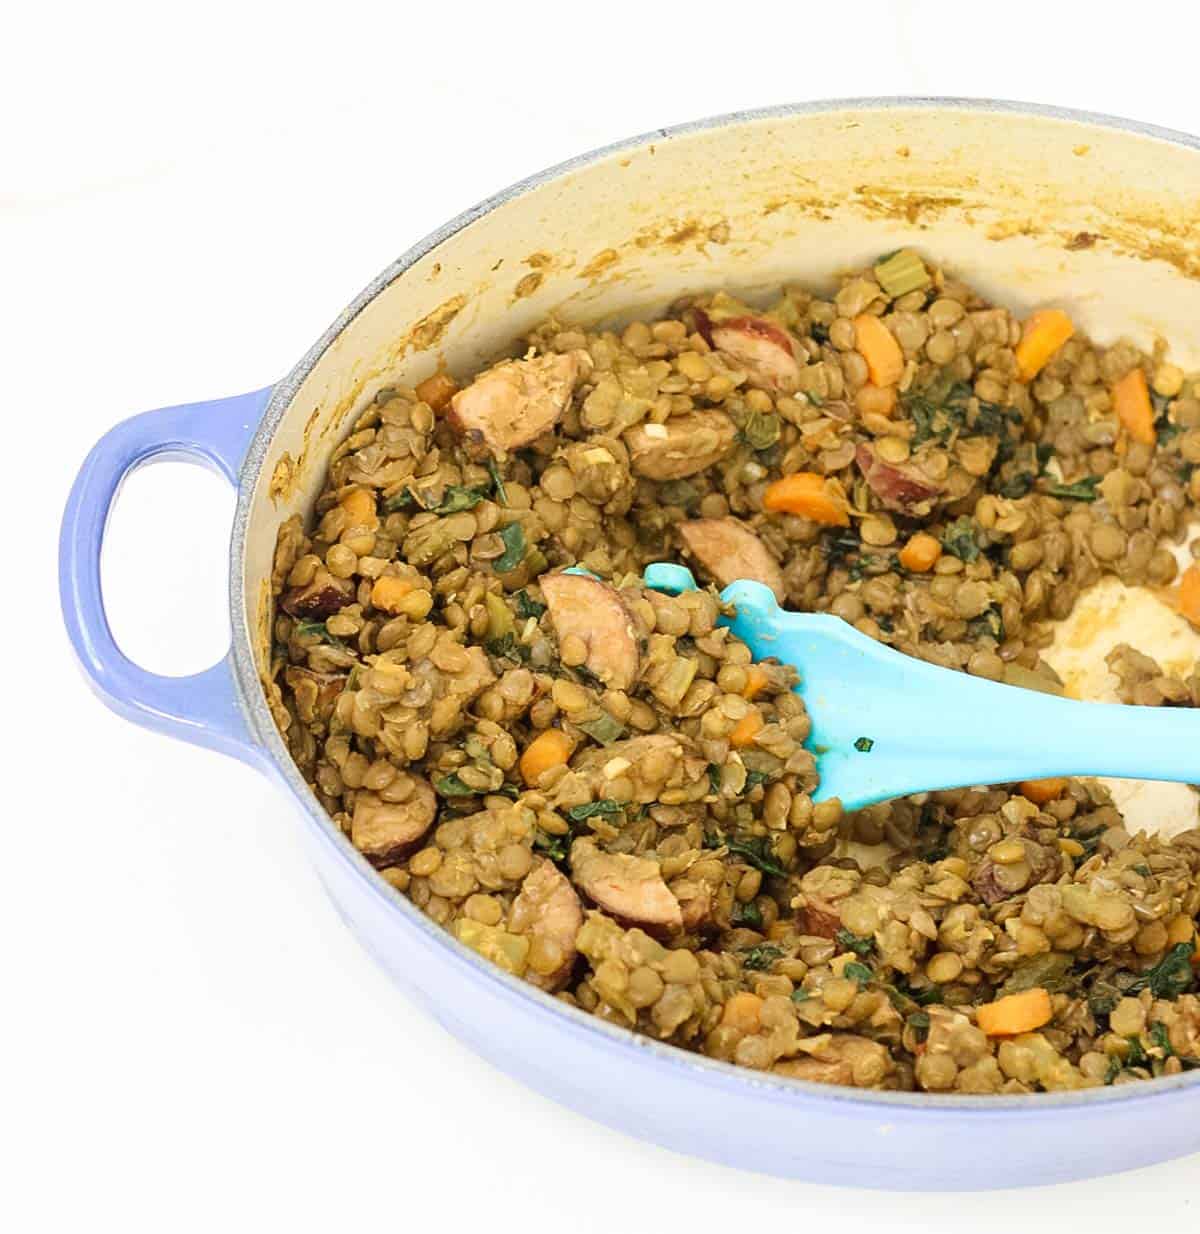 blue pot full of sausage and lentils with kale and veggies being stirred by a blue spoon.